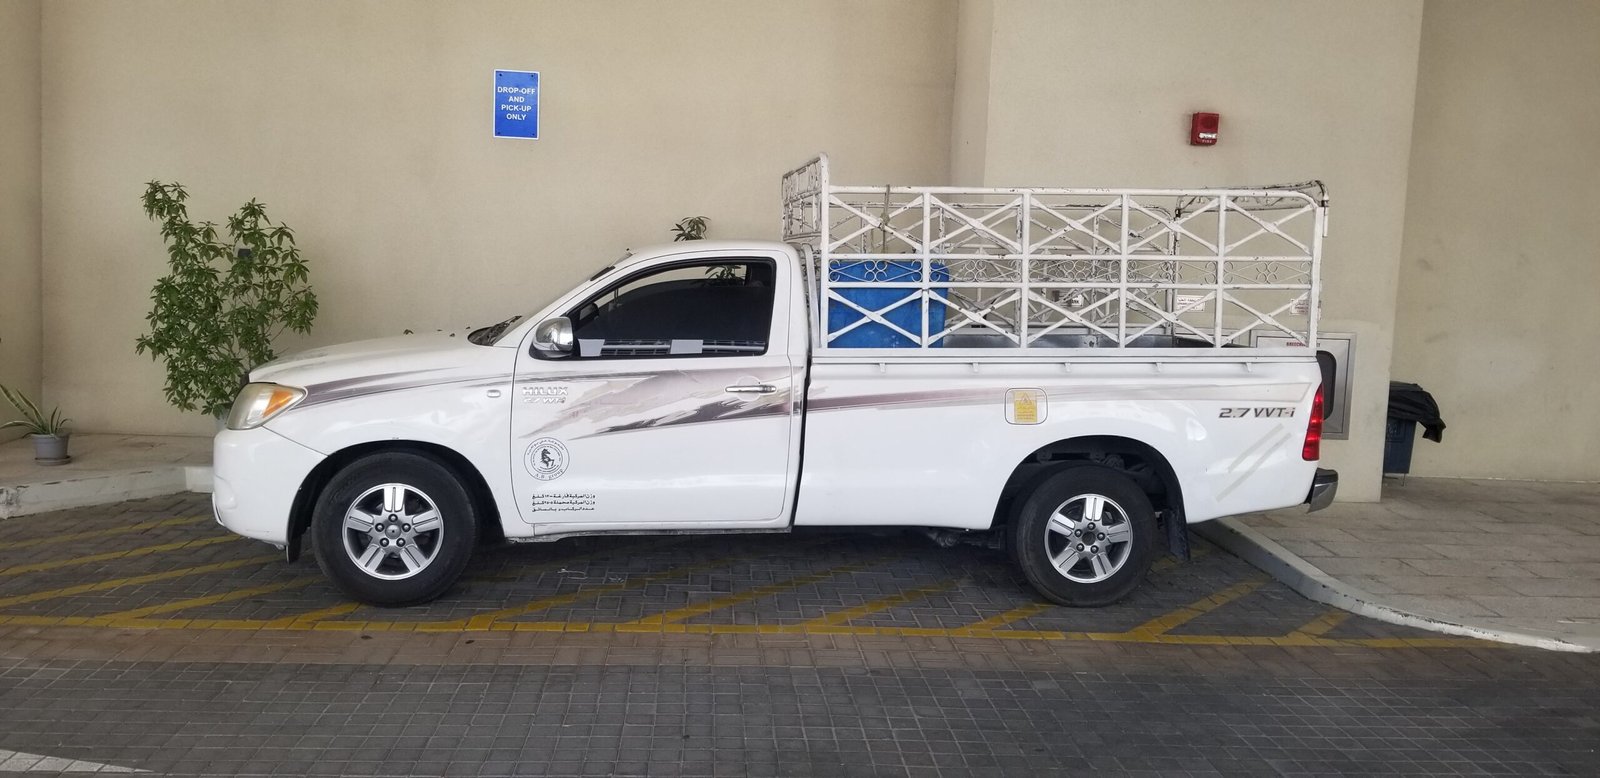 Quick Junk Collection In Jlt 0527161730